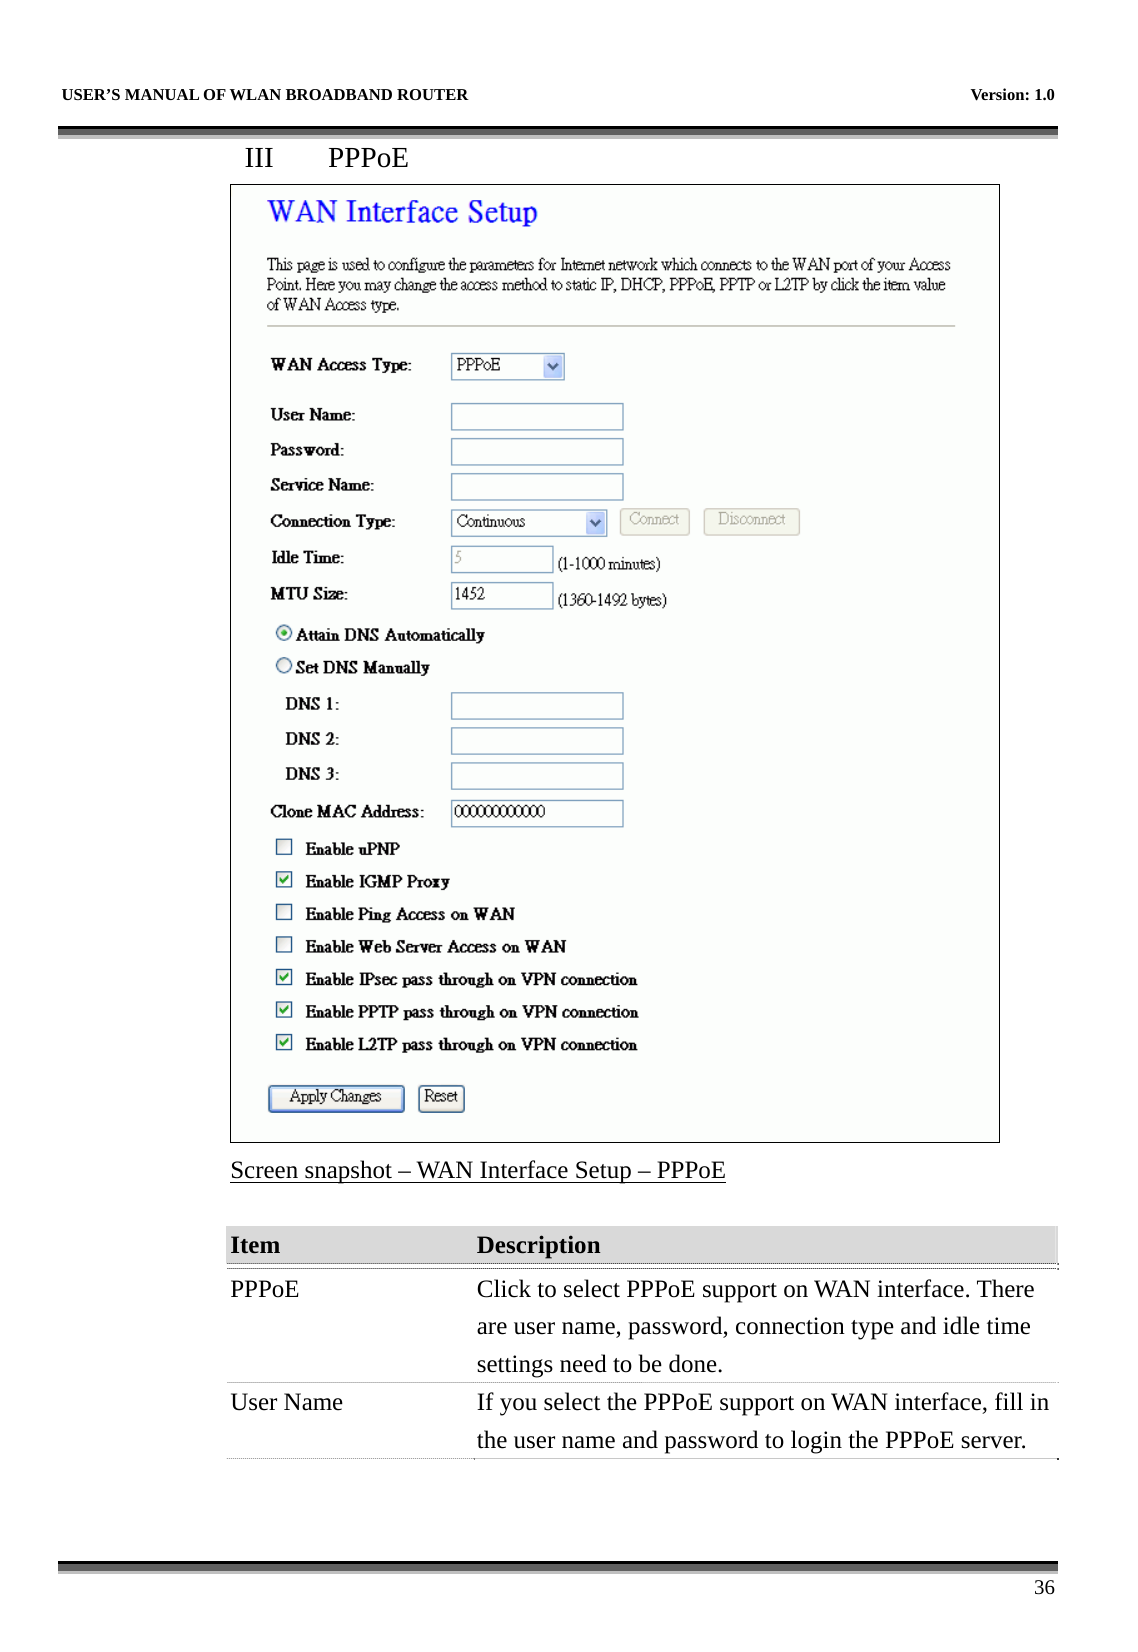   USER’S MANUAL OF WLAN BROADBAND ROUTER    Version: 1.0      36 III  PPPoE  Screen snapshot – WAN Interface Setup – PPPoE  Item  Description   PPPoE  Click to select PPPoE support on WAN interface. There are user name, password, connection type and idle time settings need to be done. User Name  If you select the PPPoE support on WAN interface, fill in the user name and password to login the PPPoE server. 